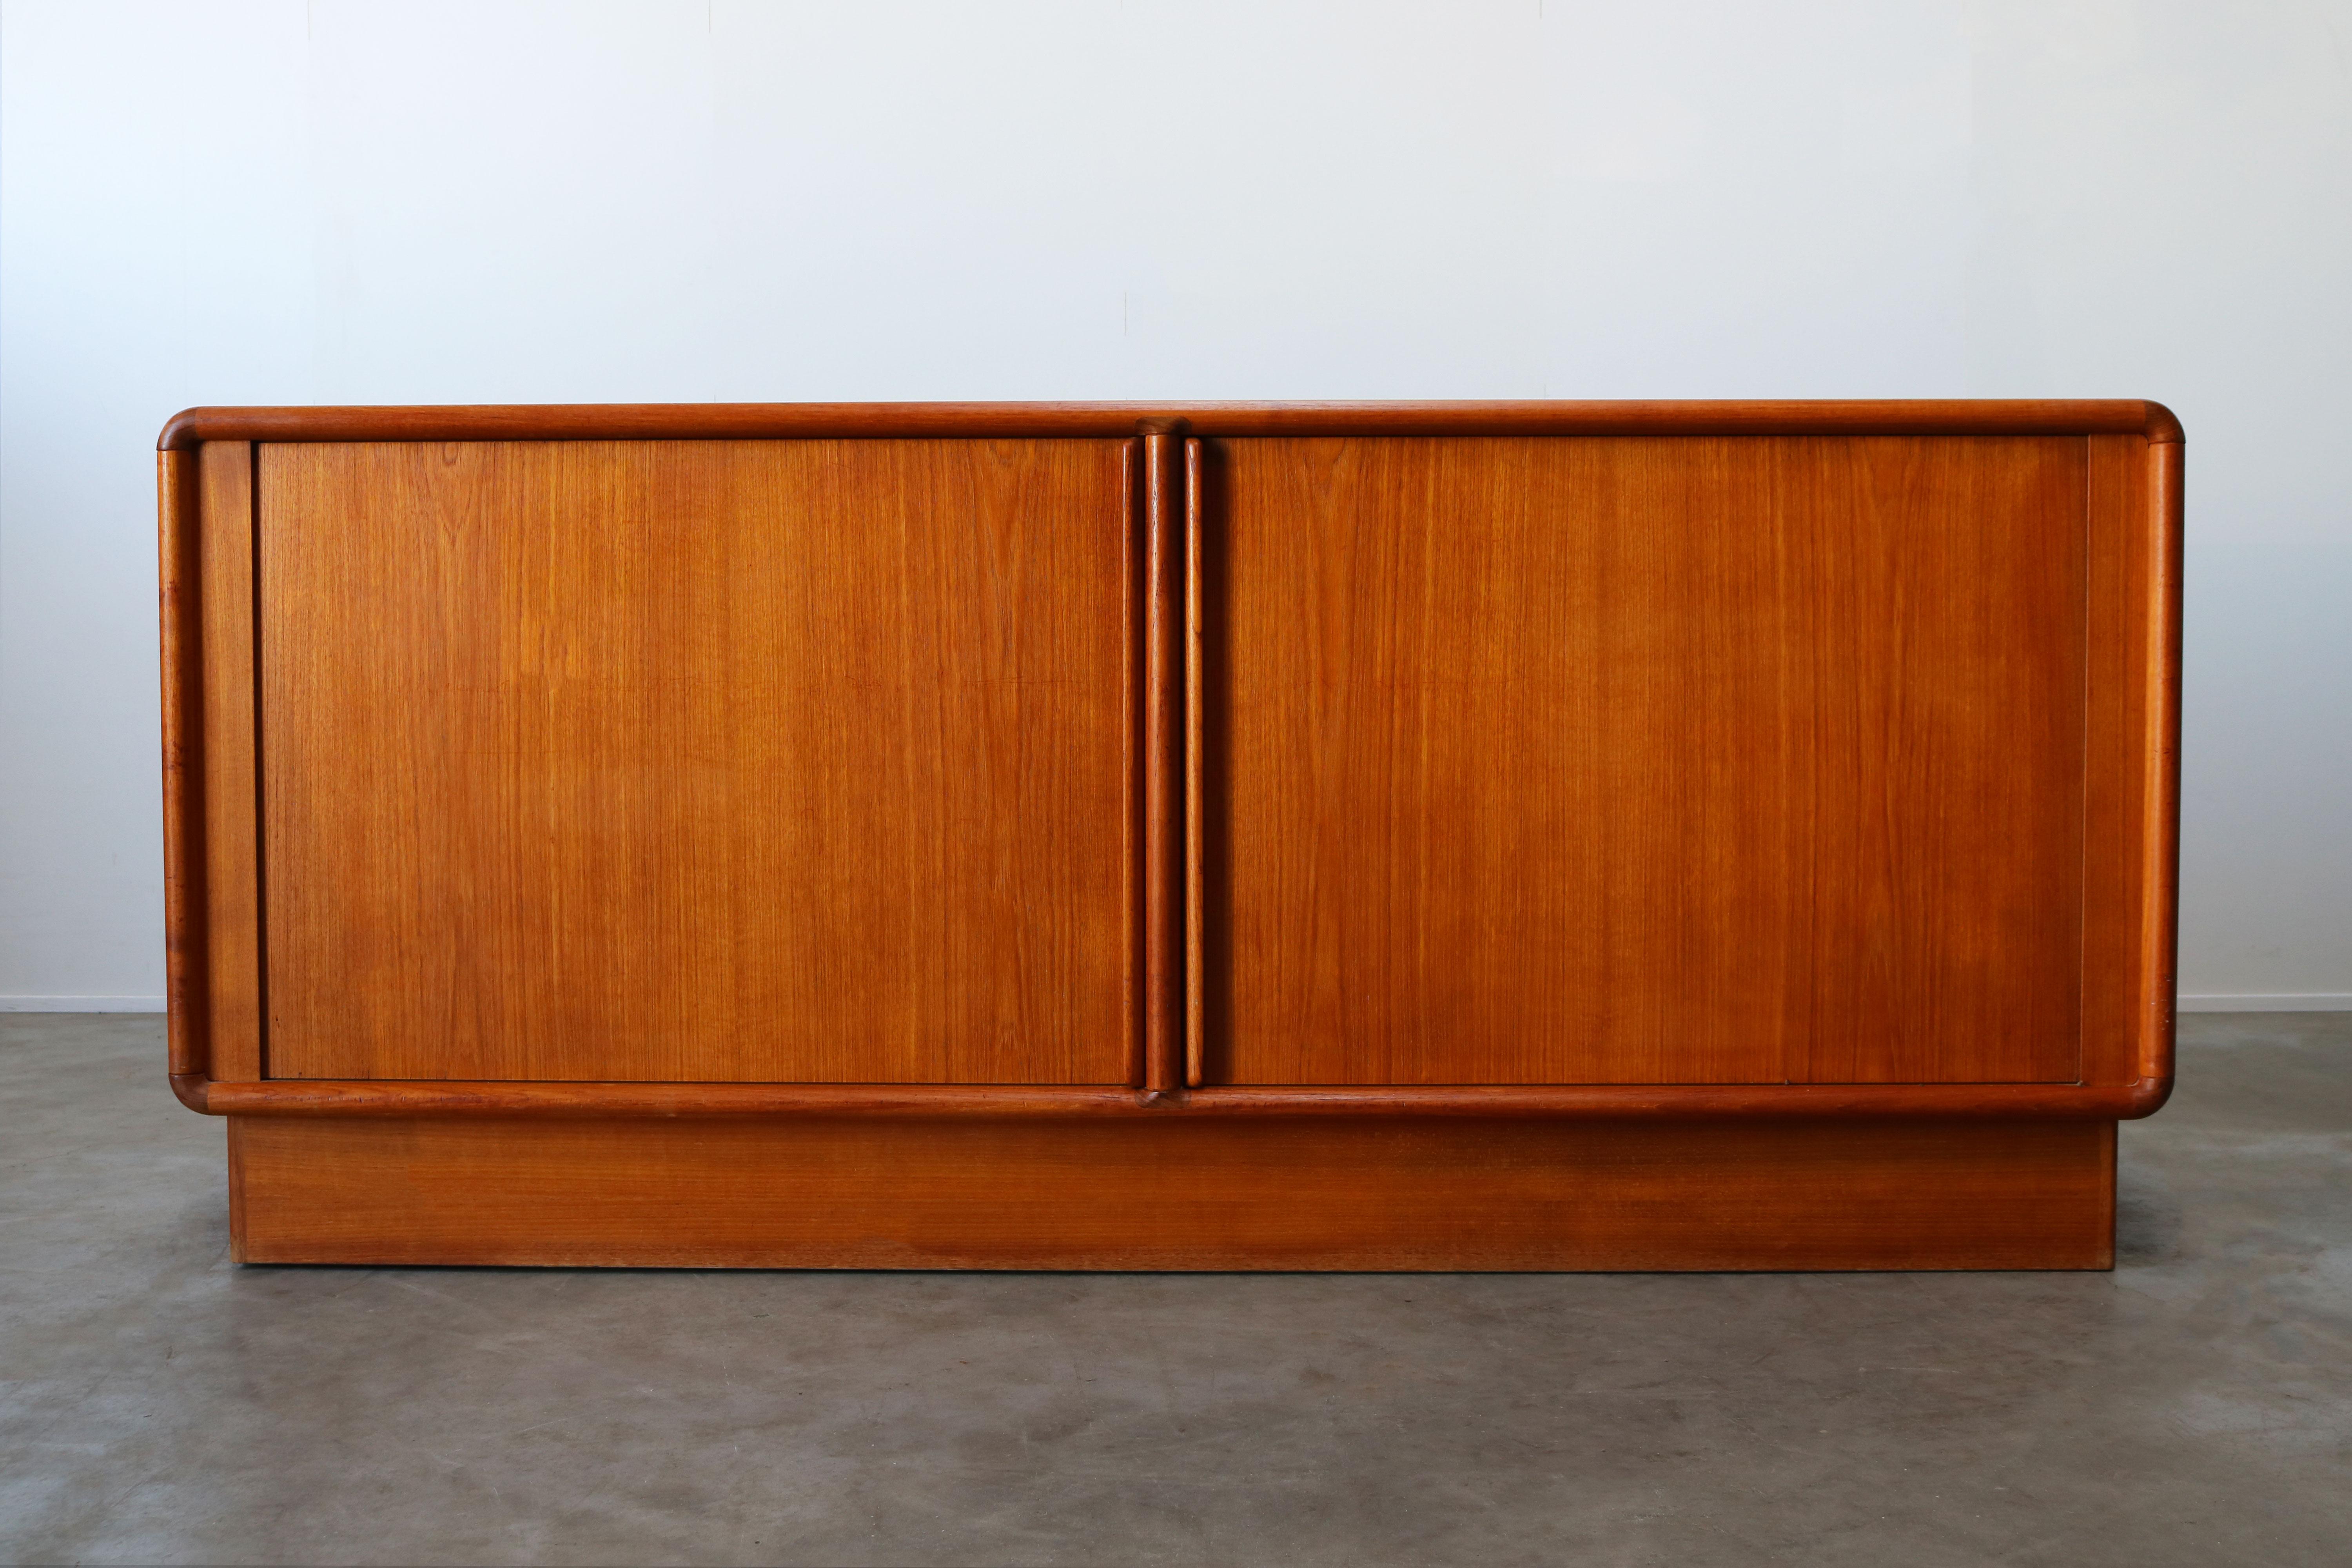 Danish design sideboard / credenza with tambour doors in teak by the Kibaek Mobelfabrik produced in Denmark in the 1950s. The Kibaek Mobelfabrik is known for its high quality Danish furniture and this piece perfectly reflects that. The sideboard has